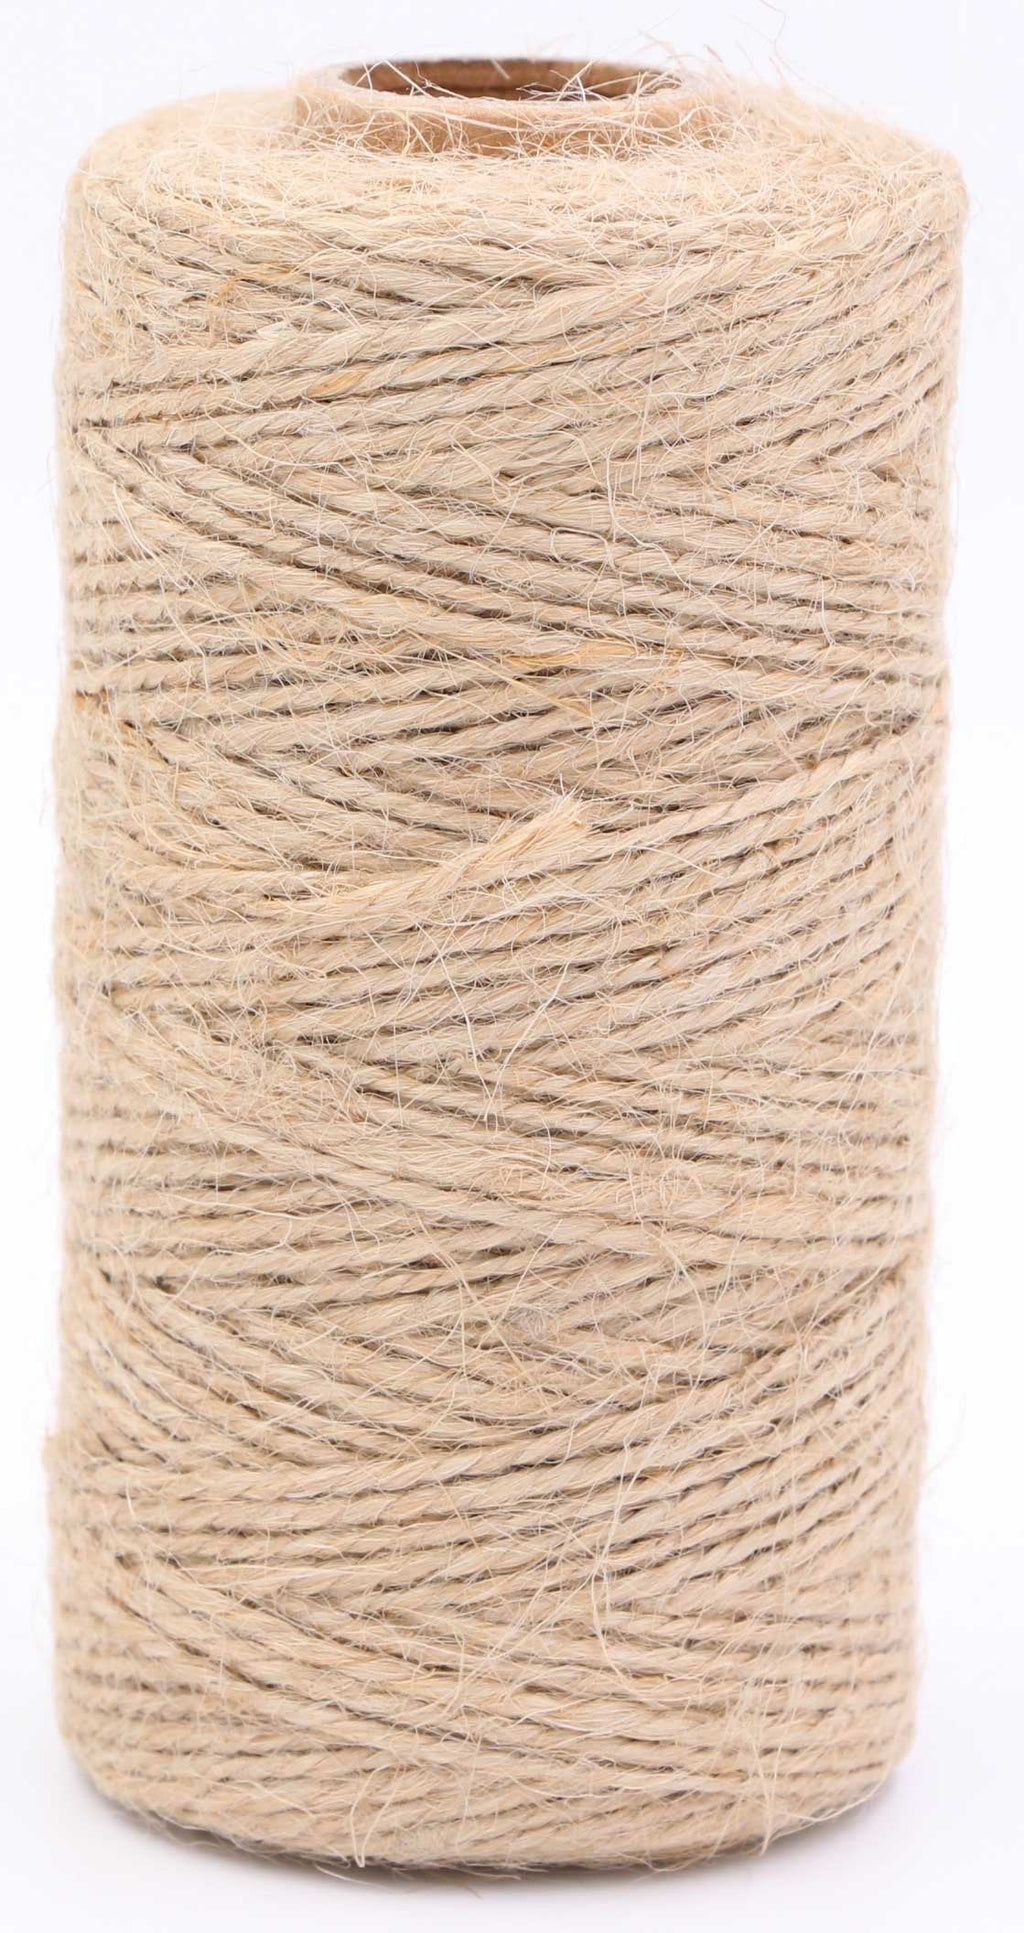  [AUSTRALIA] - LeBeila Natural Jute Twine String – 2 ply Hemp Cord Industrial Packing Rope Durable Materials Heavy Duty Decorative String For Garden Arts Crafts Gift Bakers Butcher Clothespins Tags (328 Feet, Brown) 328feet